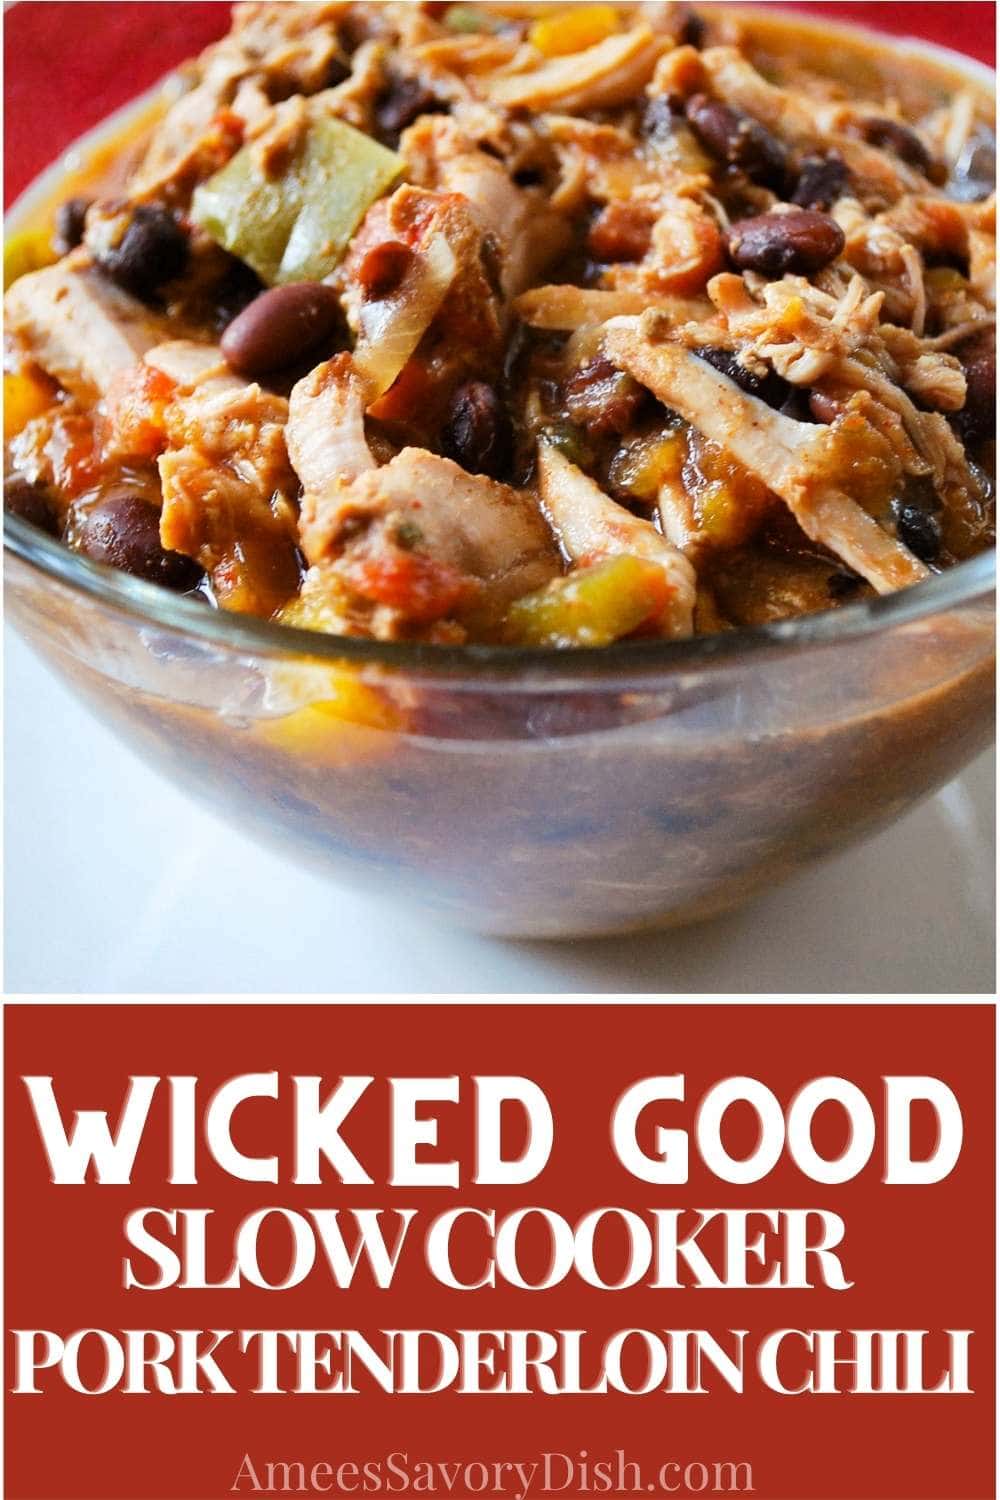 An easy slow cooker recipe for pork tenderloin chili made with black beans, salsa, fresh pork tenderloin, peppers, onions, and spices. This recipe packs 32 grams of protein per serving. via @Ameessavorydish